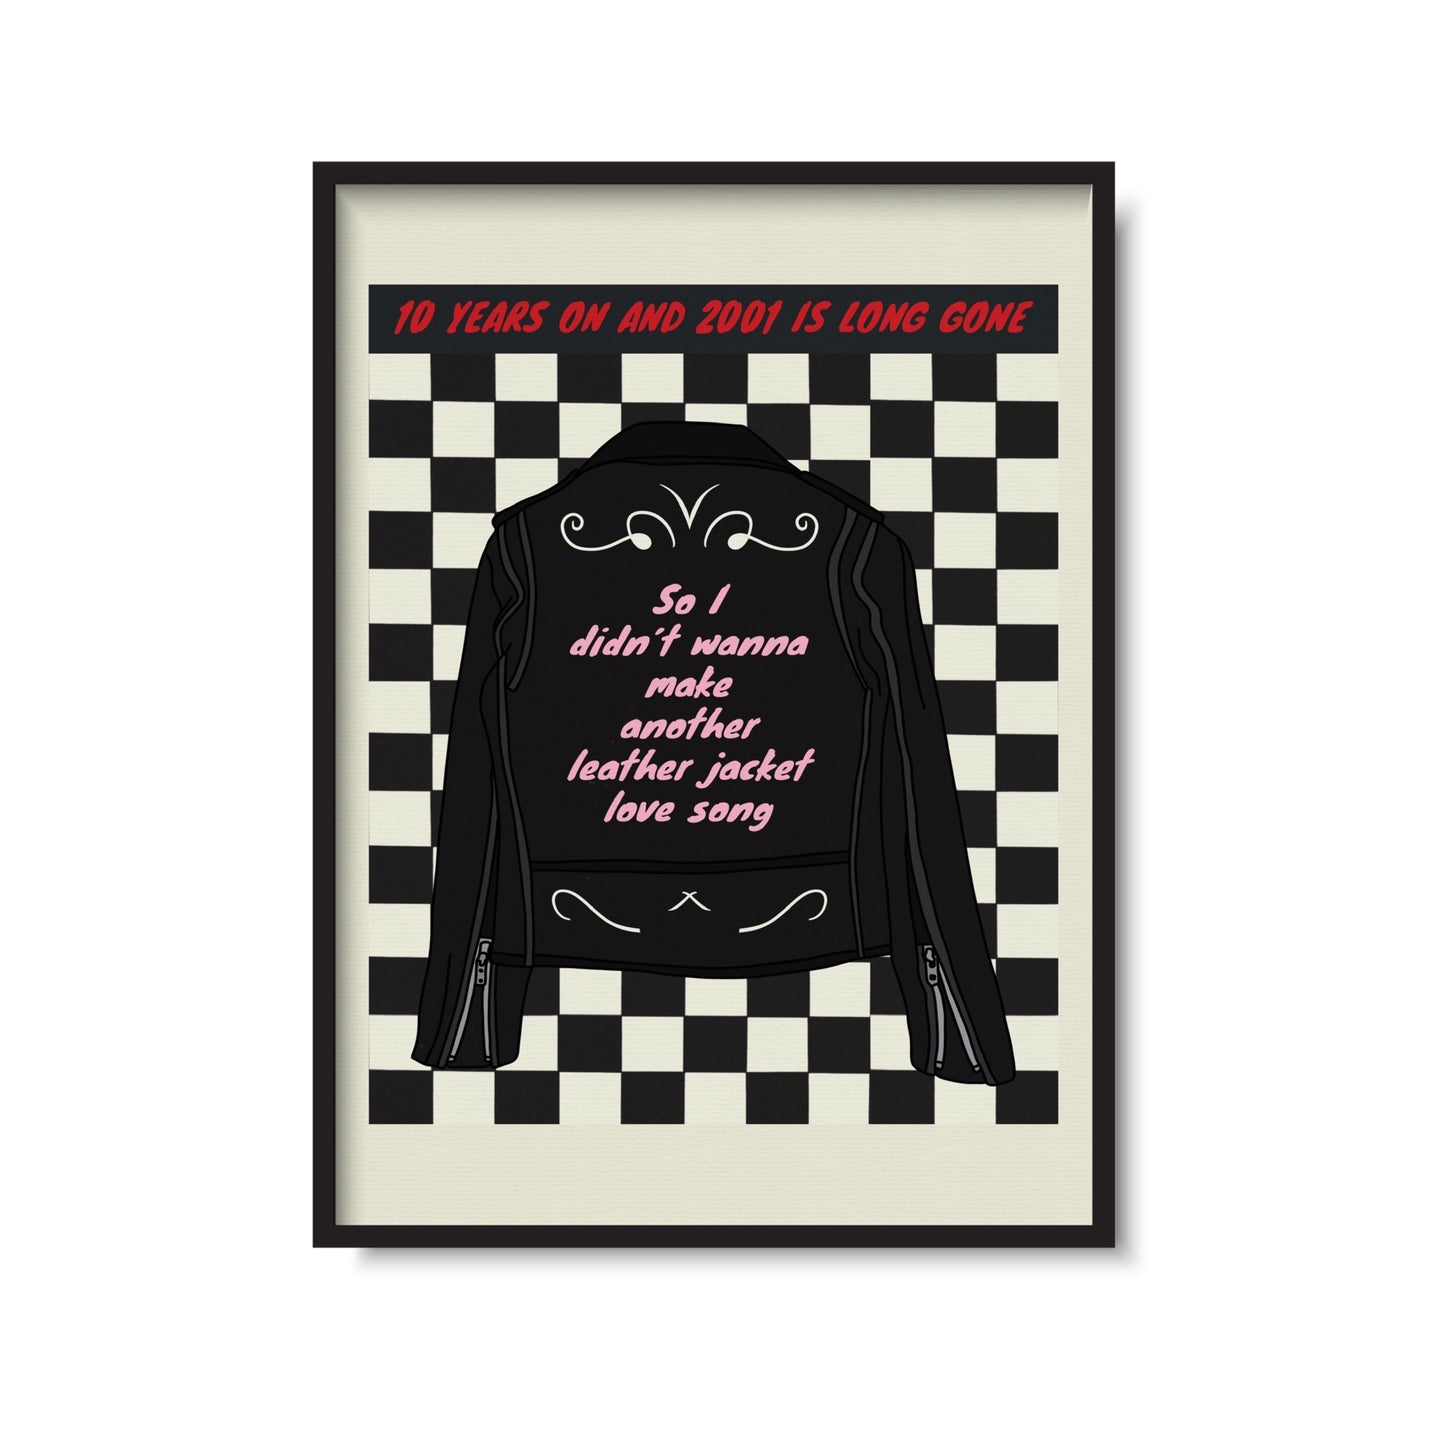 Leather Jacket Love Song Print